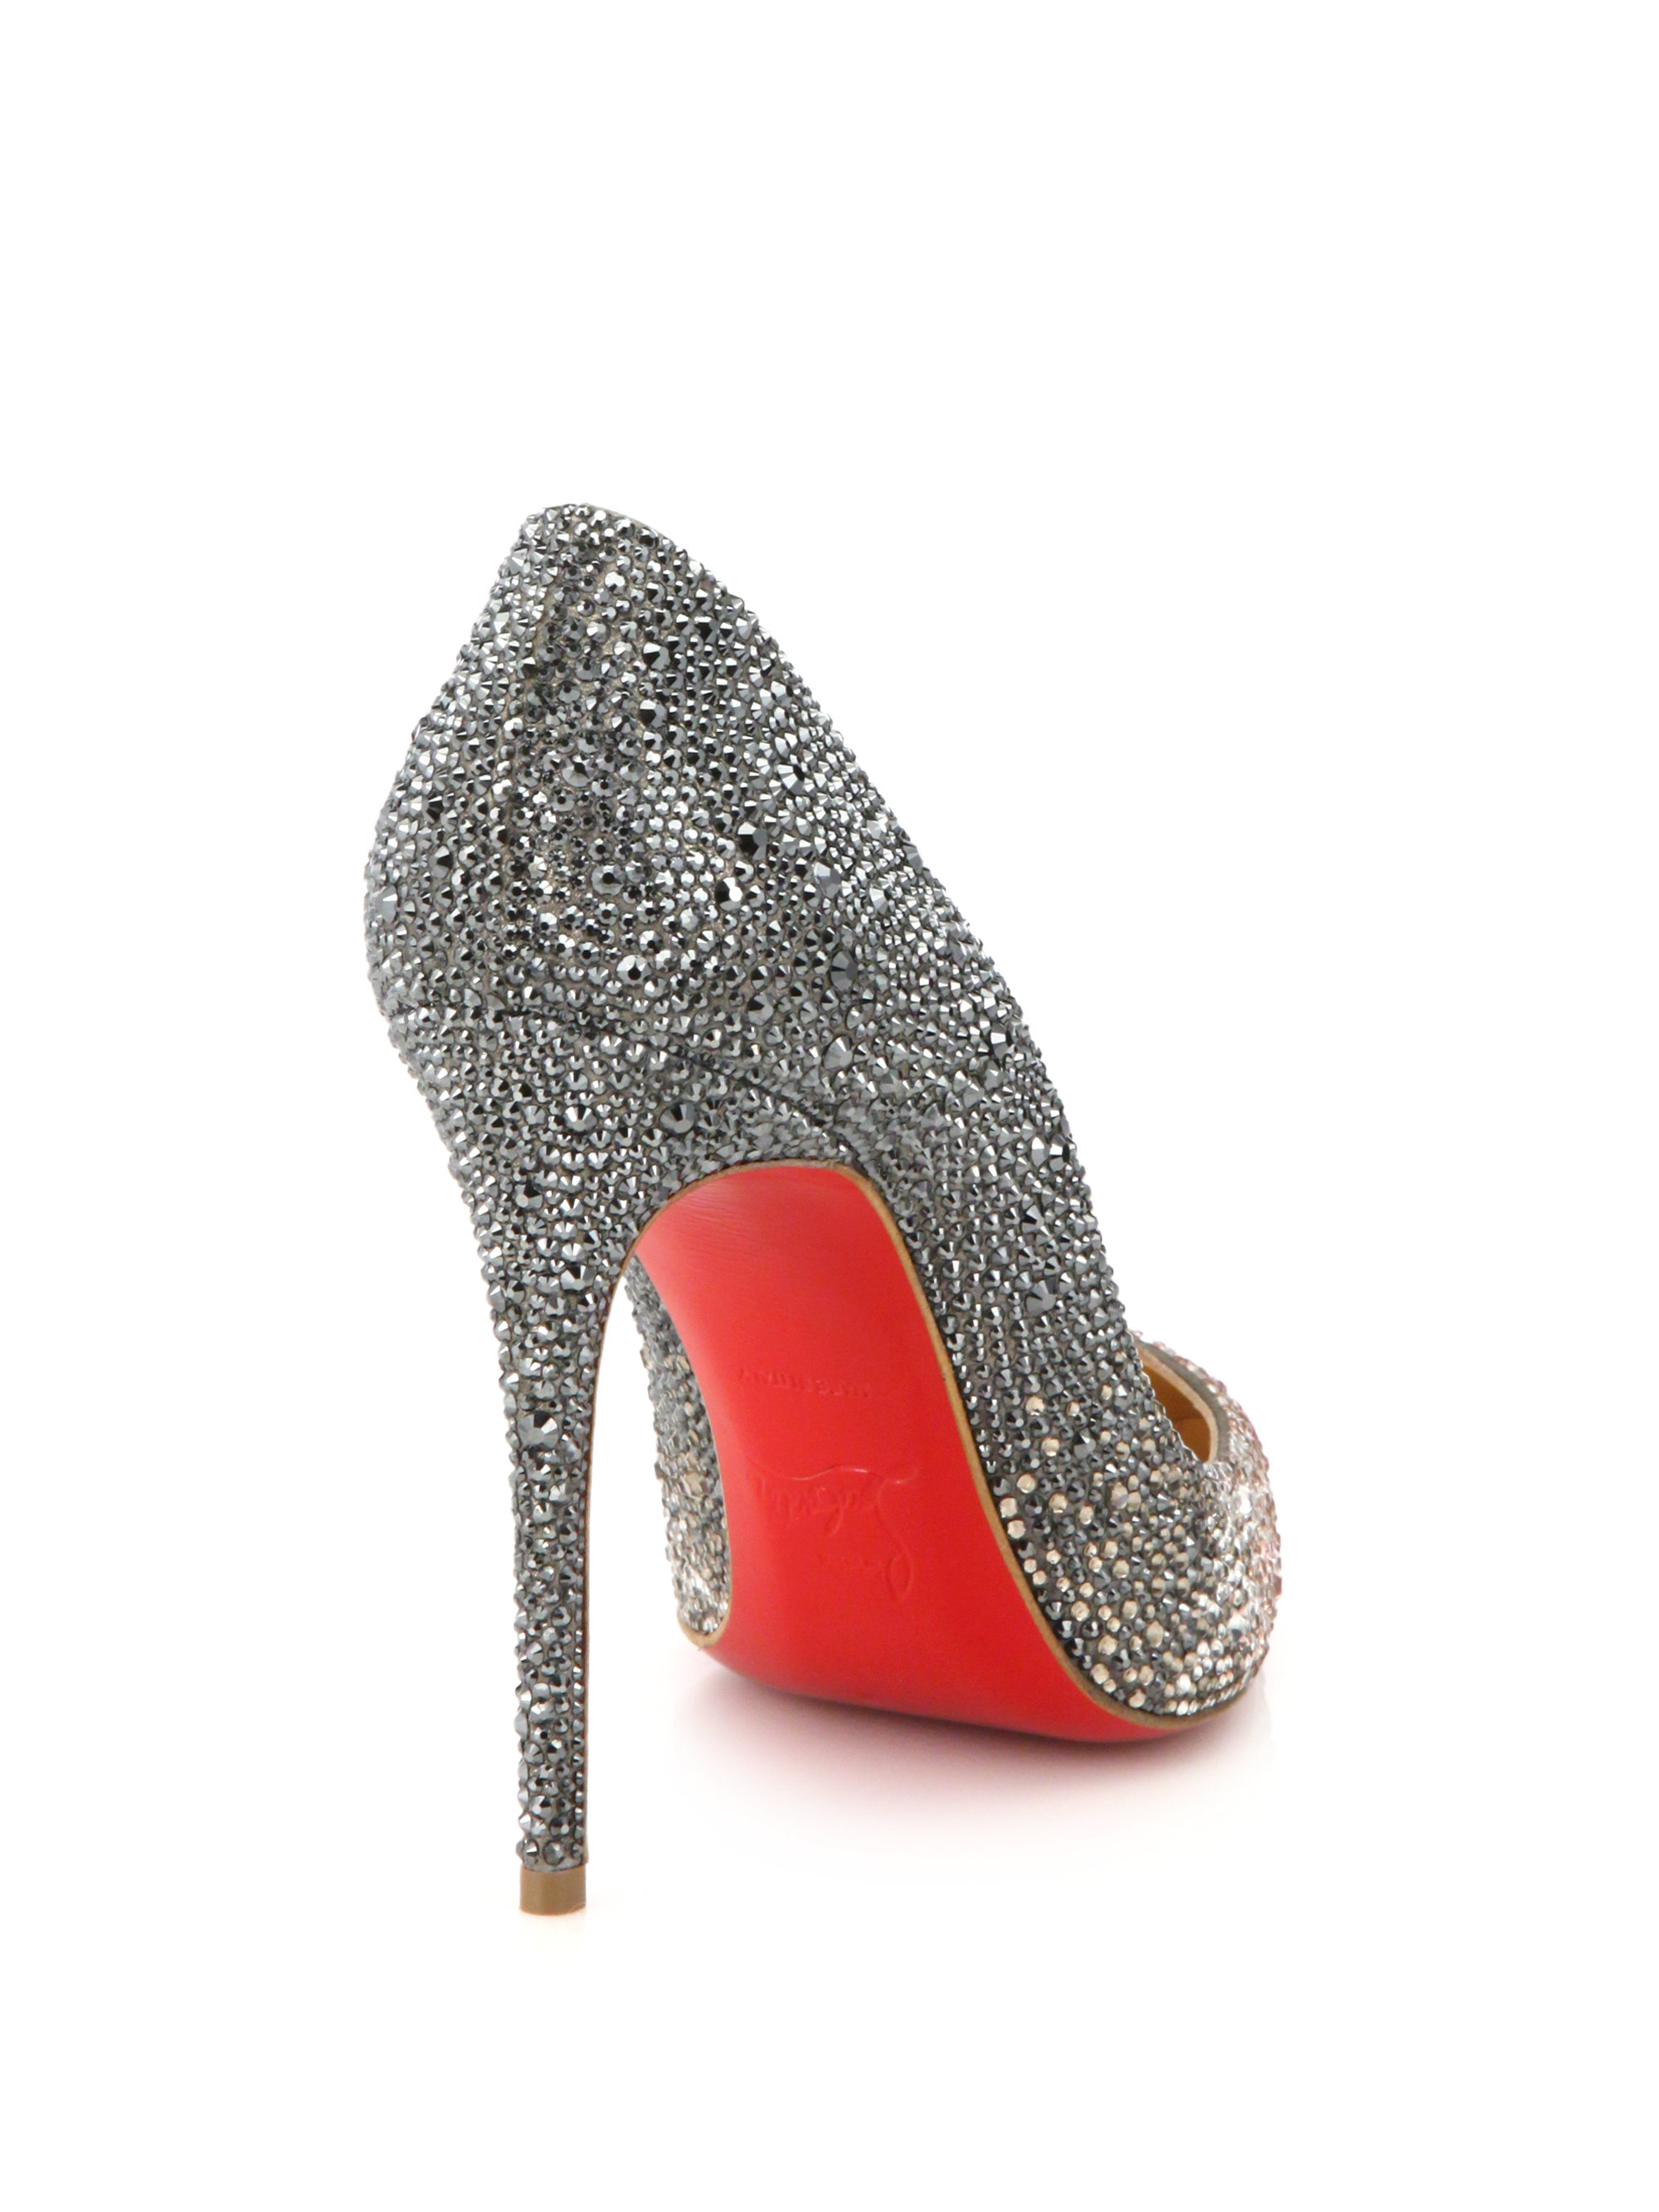 Christian louboutin Pigalle Ombr Crystal-Embellished Pumps in ...